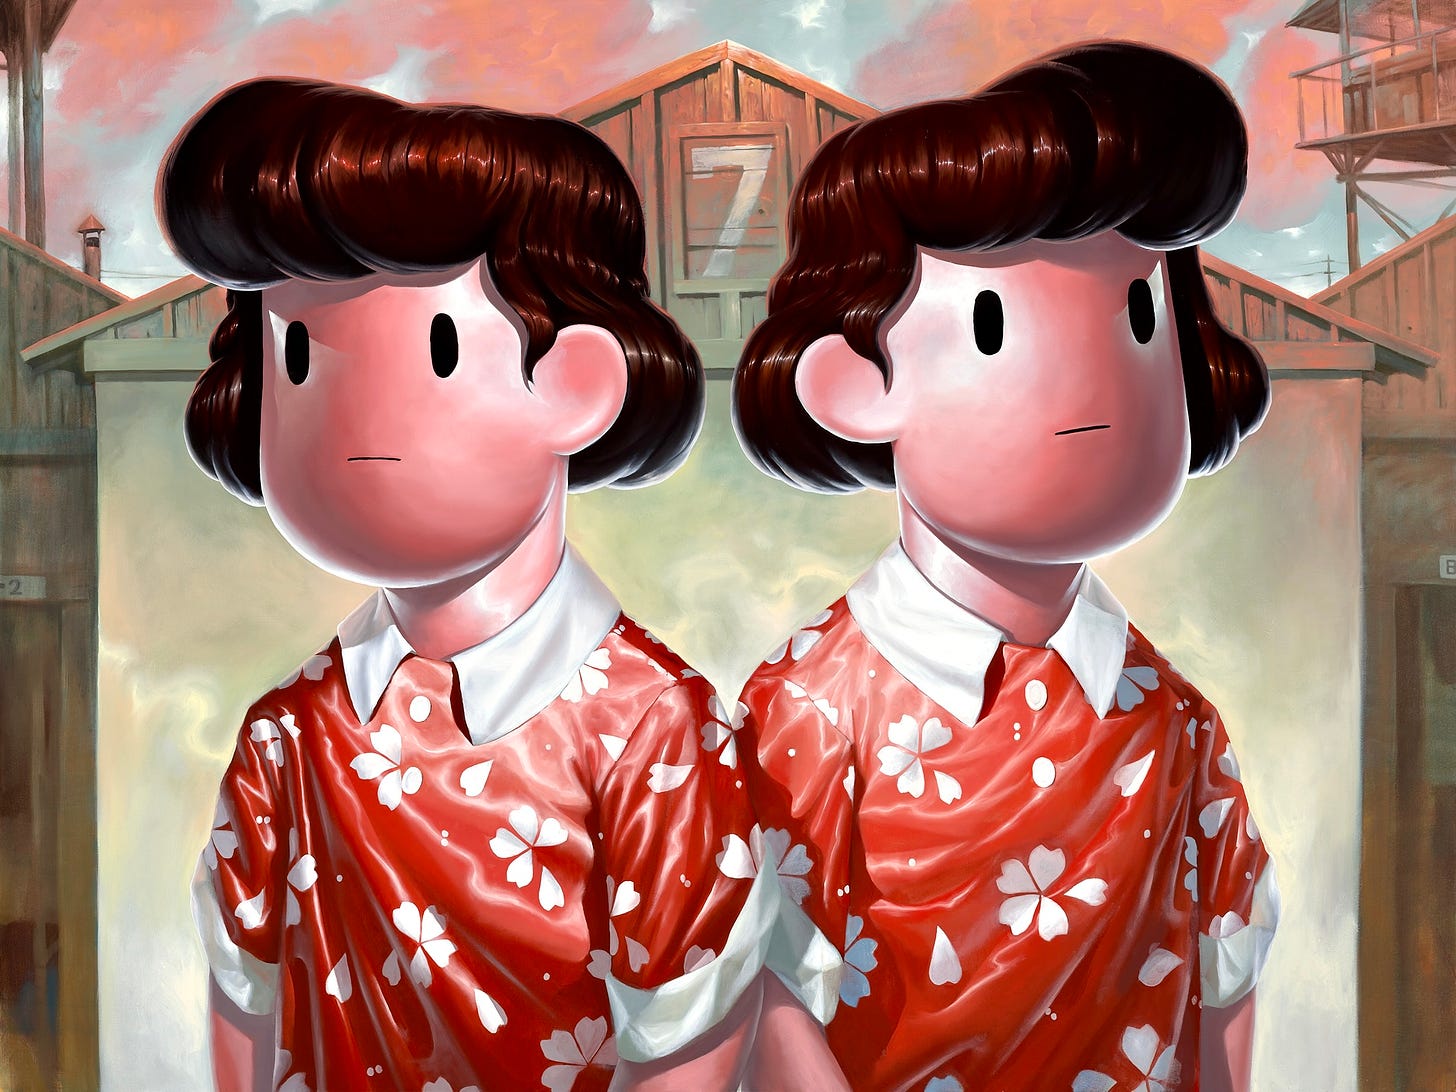 An illustrations shows two identical girls in red dresses standing in front of a warehouse